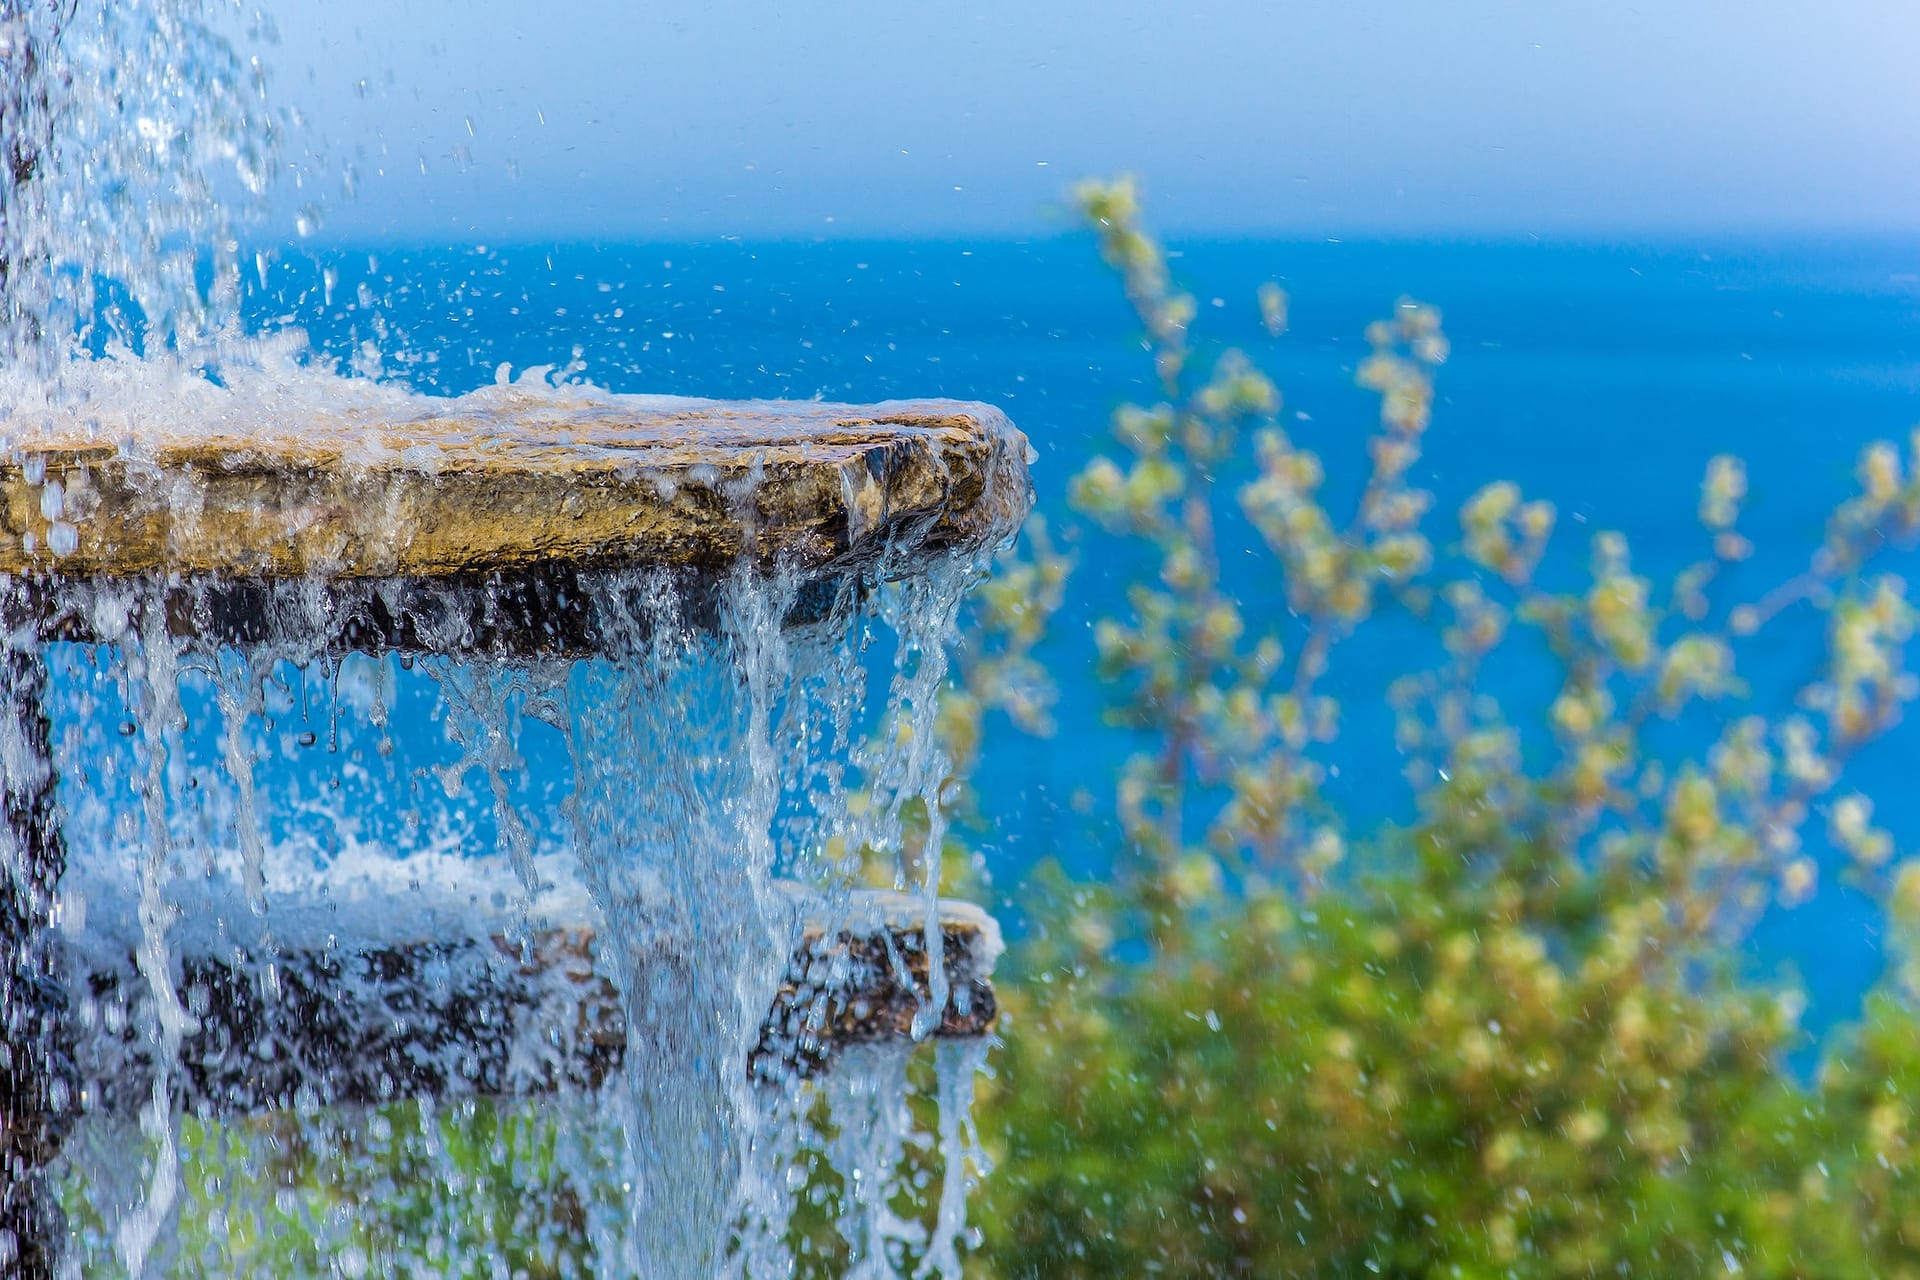 The gush of water of a fountain against the blue sea